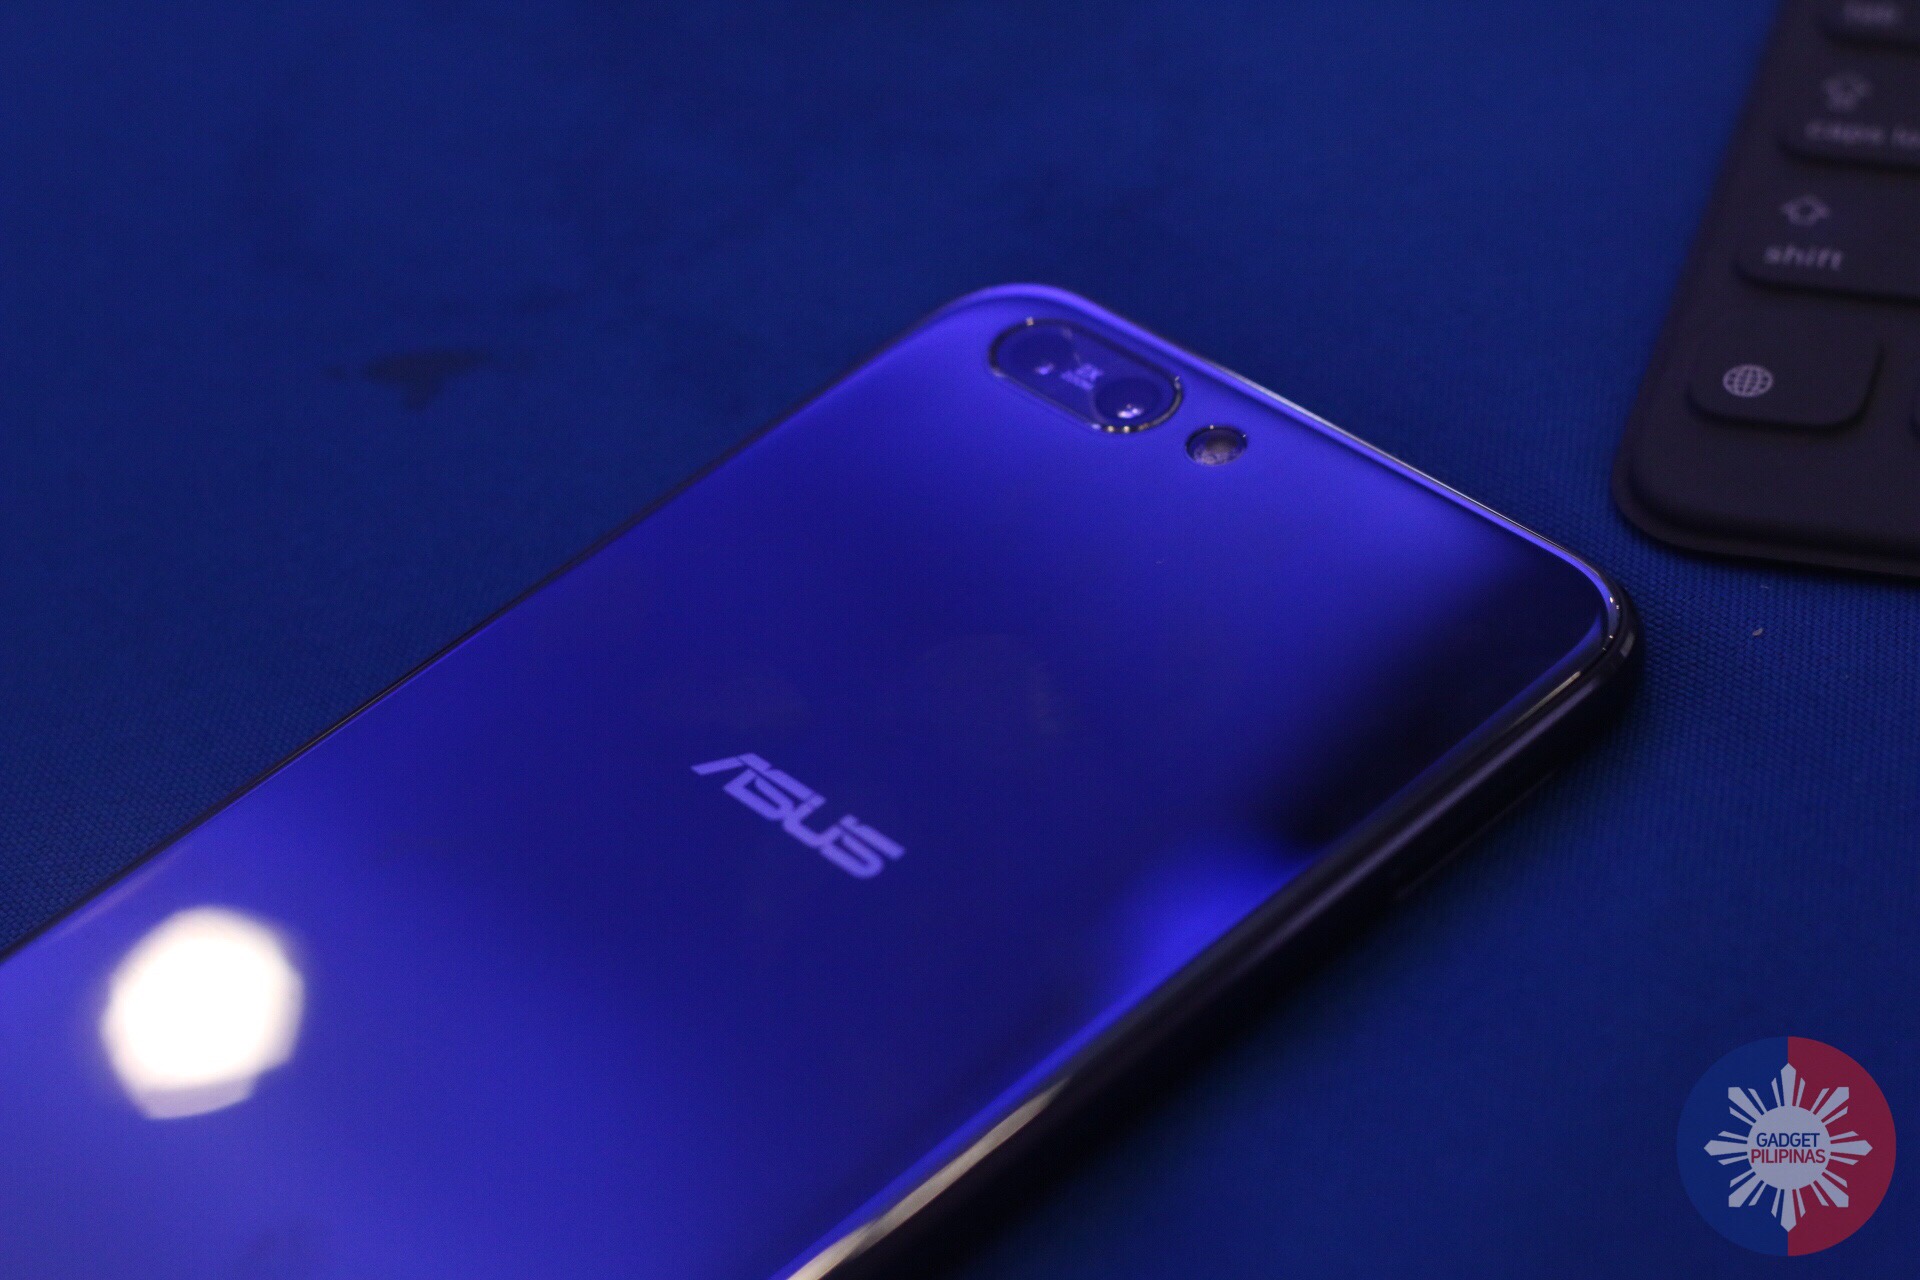 ASUS Zenfone 4 and Zenfone 4 Pro Launched in PH